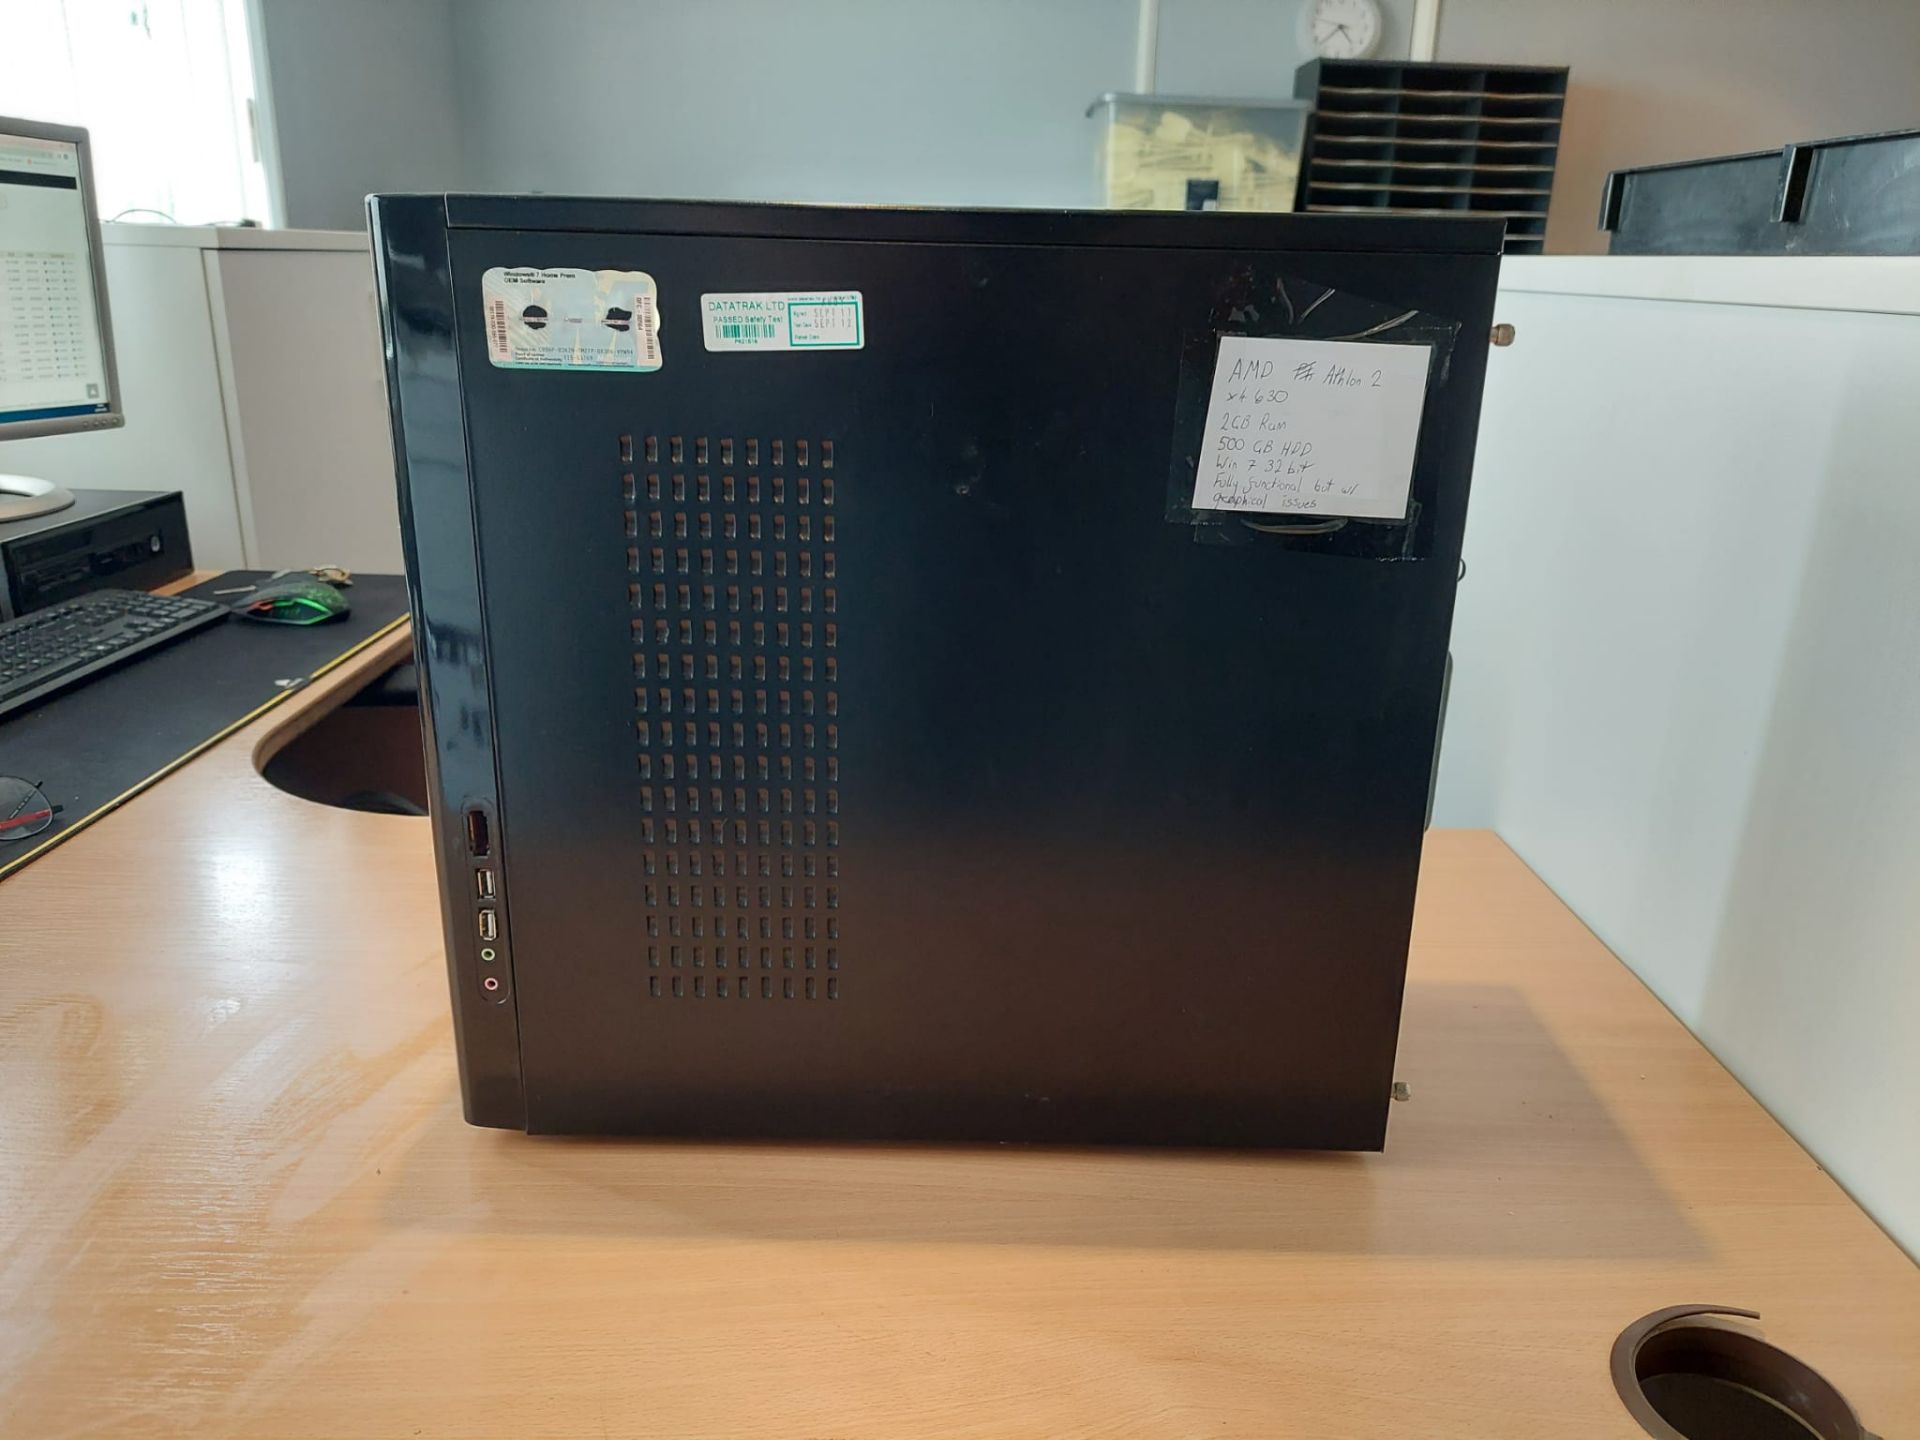 2010 Athlon II x4 360 PC (Has some issues) *NO VAT* - Image 4 of 12